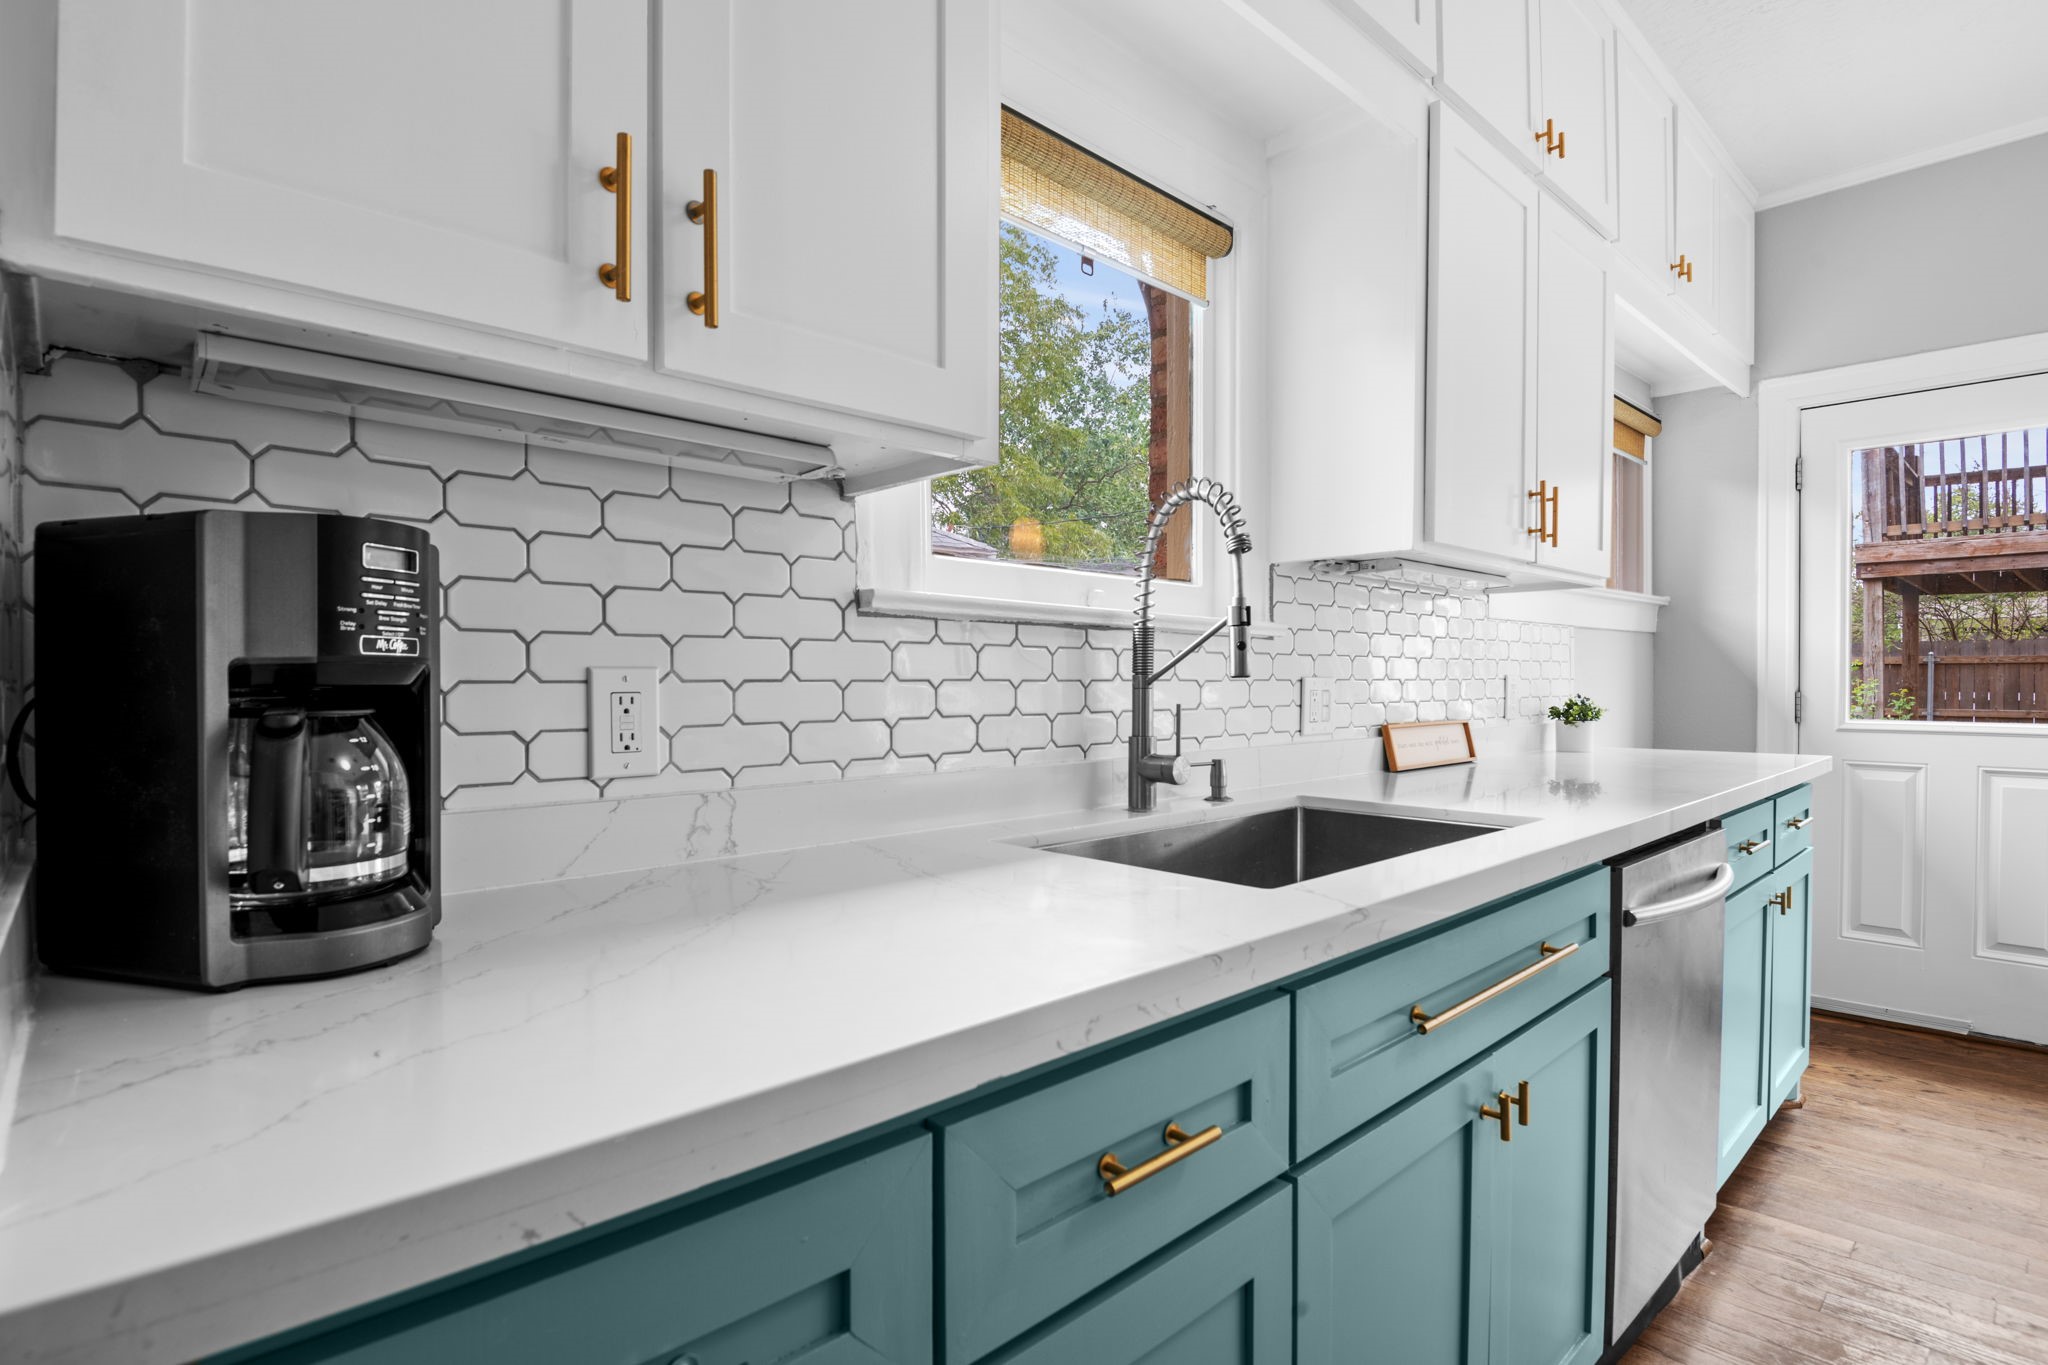 The current owners installed extra cabinets for storage, quartz countertops, backsplash, and appliances in the last few years!